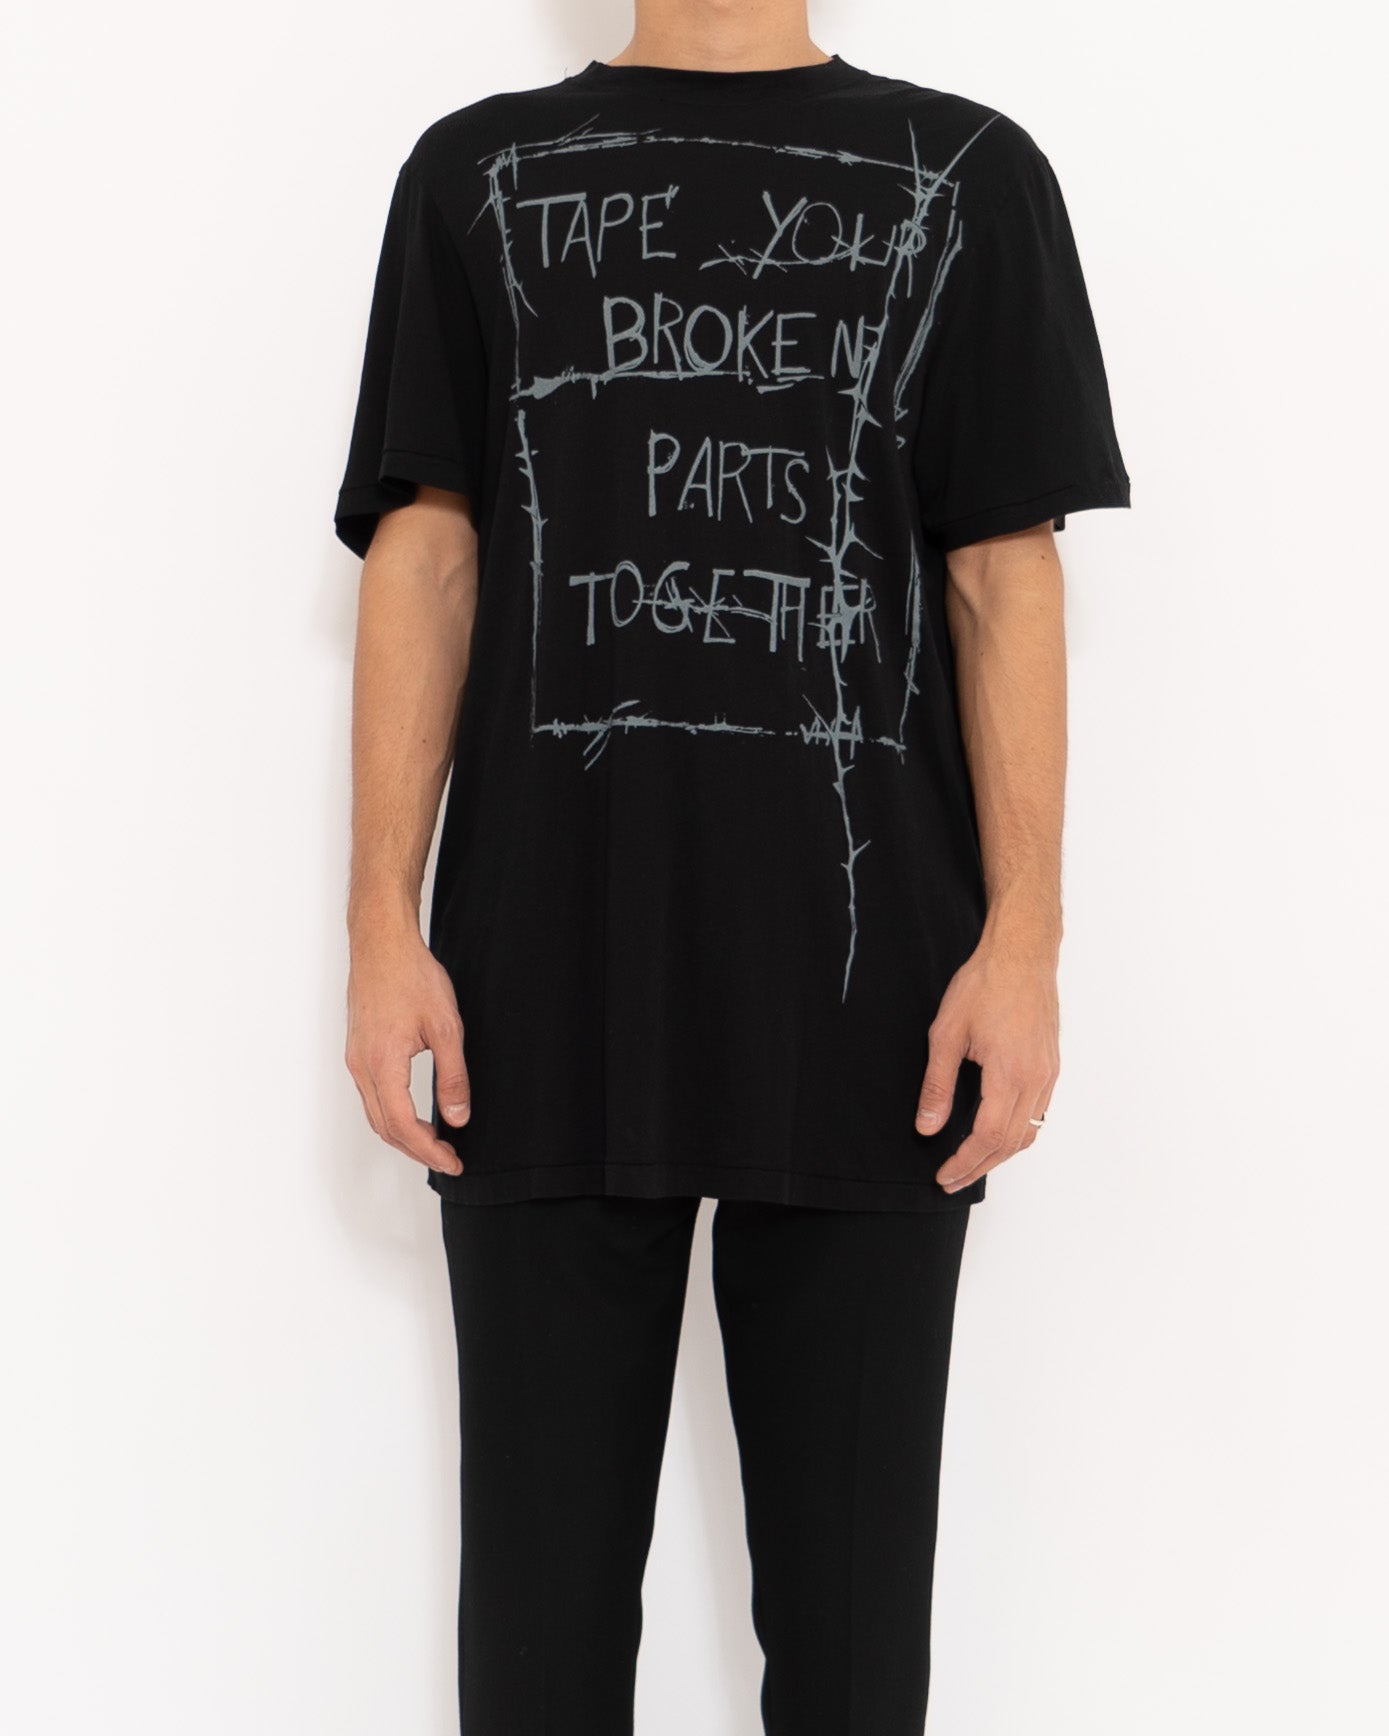 SS19 "Tape Your Broken Parts Together" T-Shirt Sample